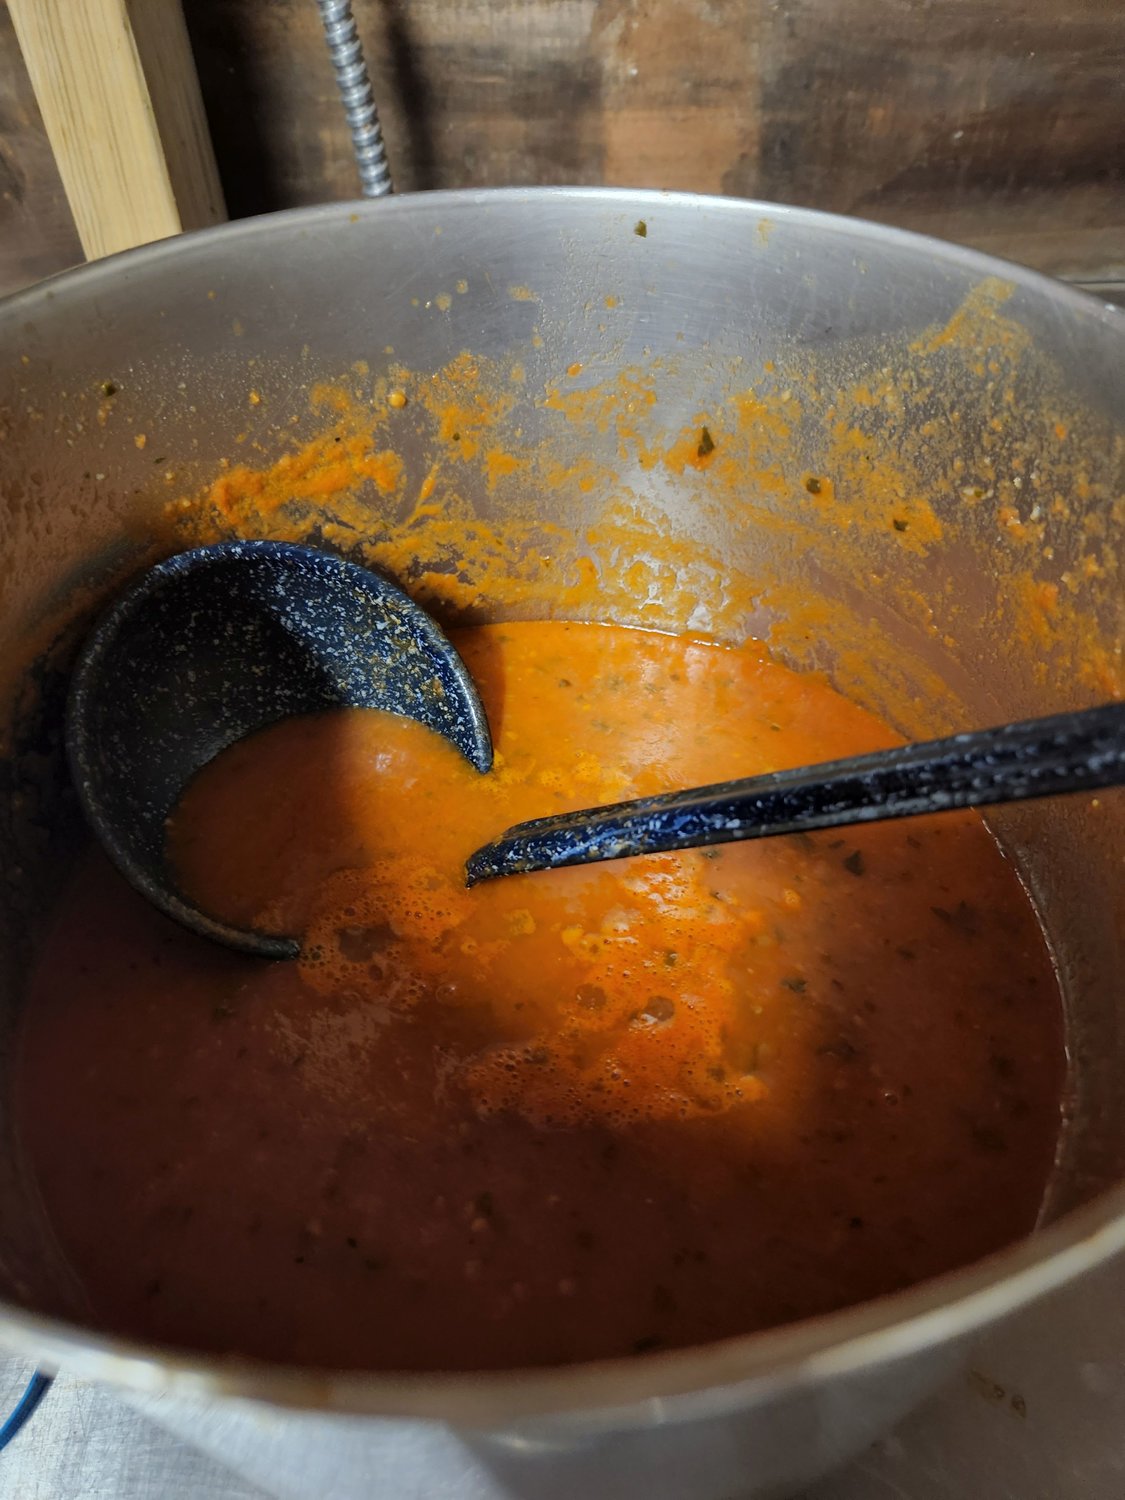 Fresh local tomatoes and basil are the heart of this soup, which
was being served recently at Plumsteadville Farmers Market. The Saturday market continues into the fall.